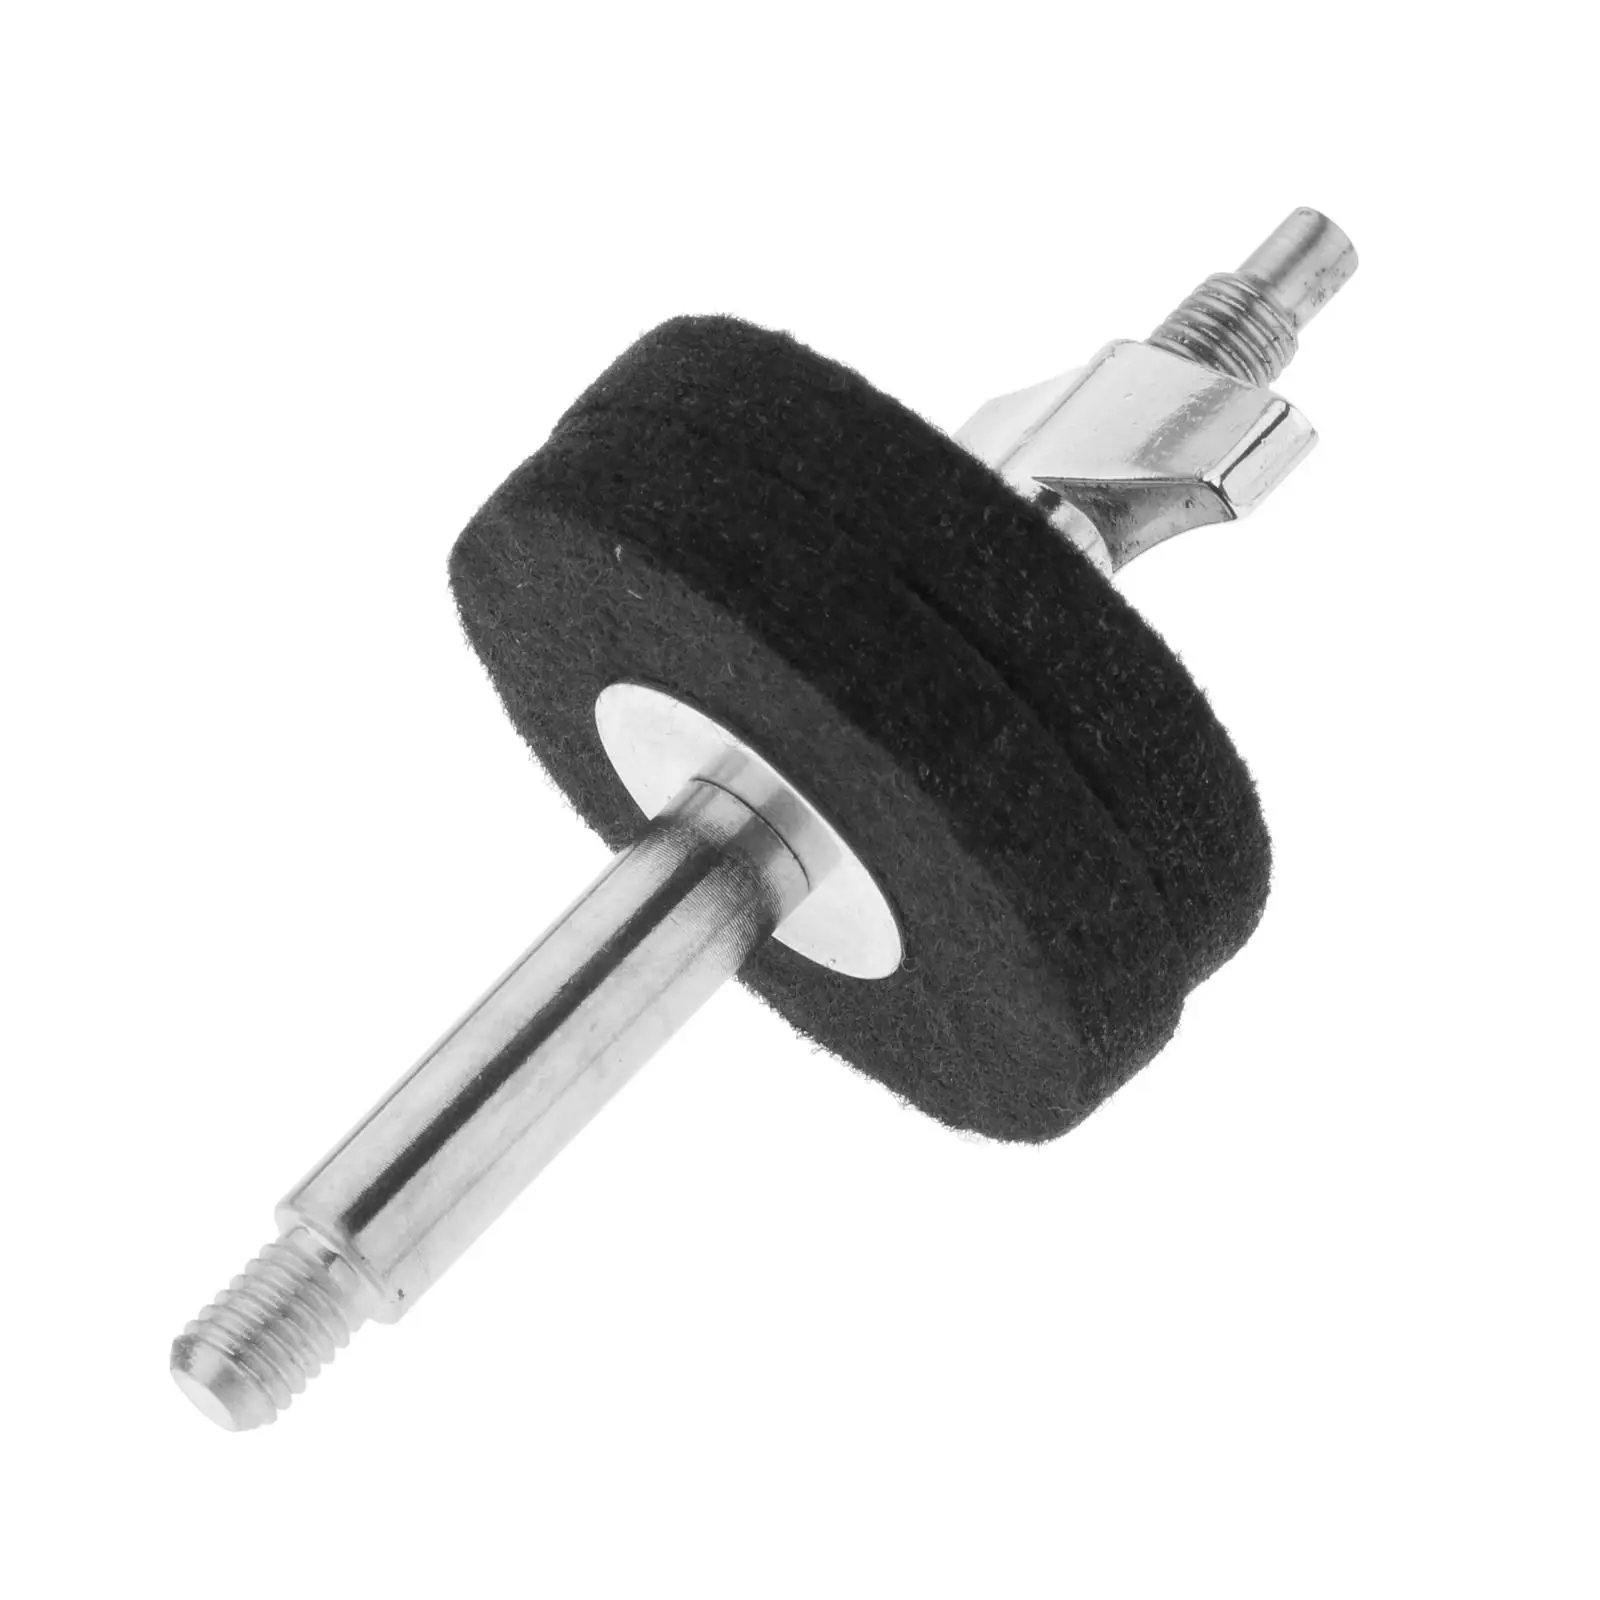 Cymbal Stacker Attachment Replacement Parts Heavy Duty Steel Hi Hat Cymbal Clutch Stand Post for Instrumental Music Jazz Drum